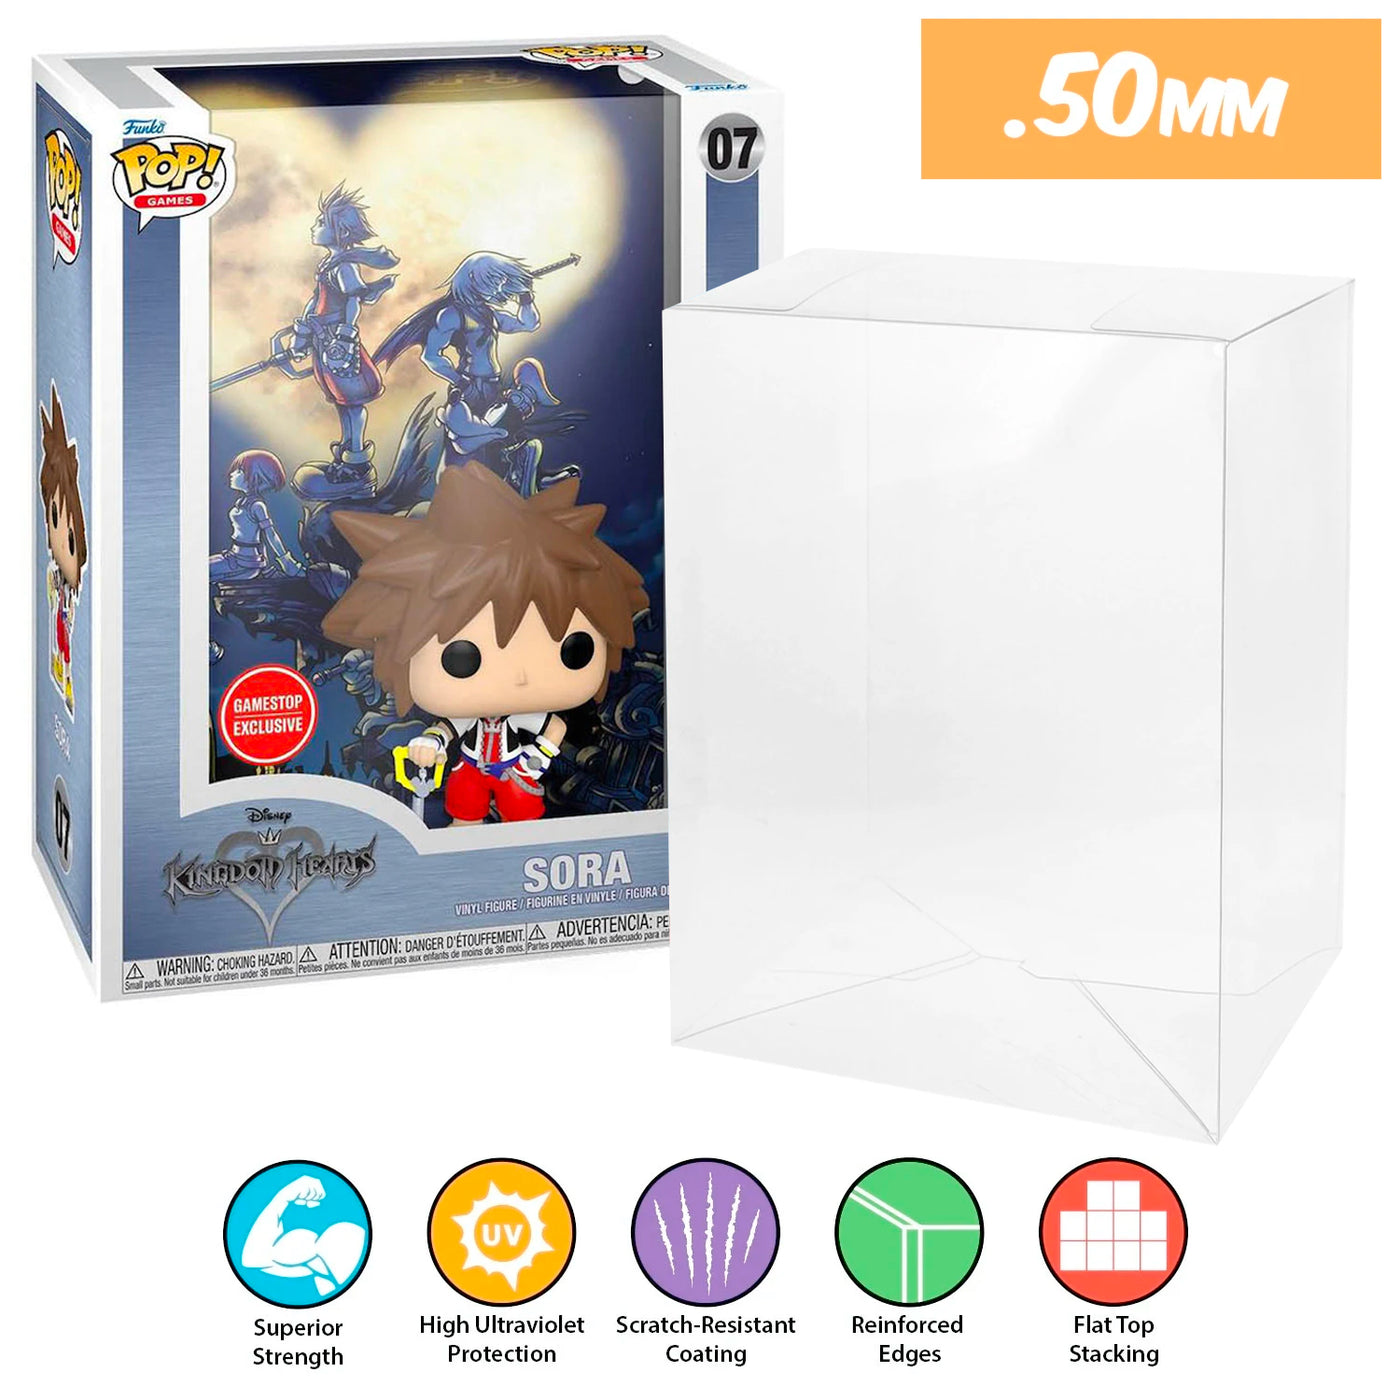 07 kingdom hearts sora pop game covers best funko pop protectors thick strong uv scratch flat top stack vinyl display geek plastic shield vaulted eco armor fits collect protect display case kollector protector